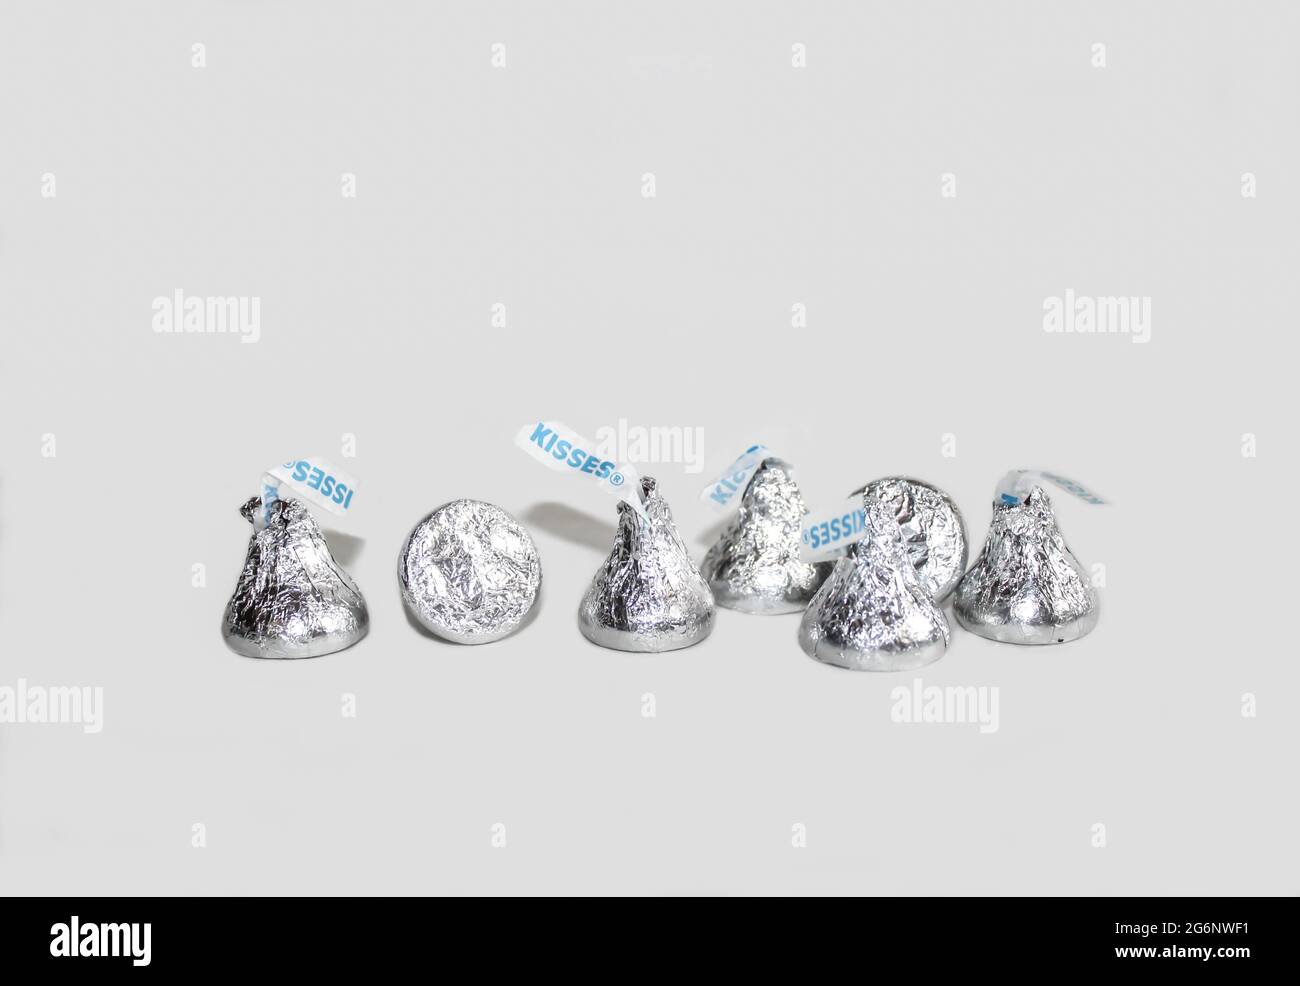 Silver Hershey's chocolate kisses isolated on a white background Stock Photo